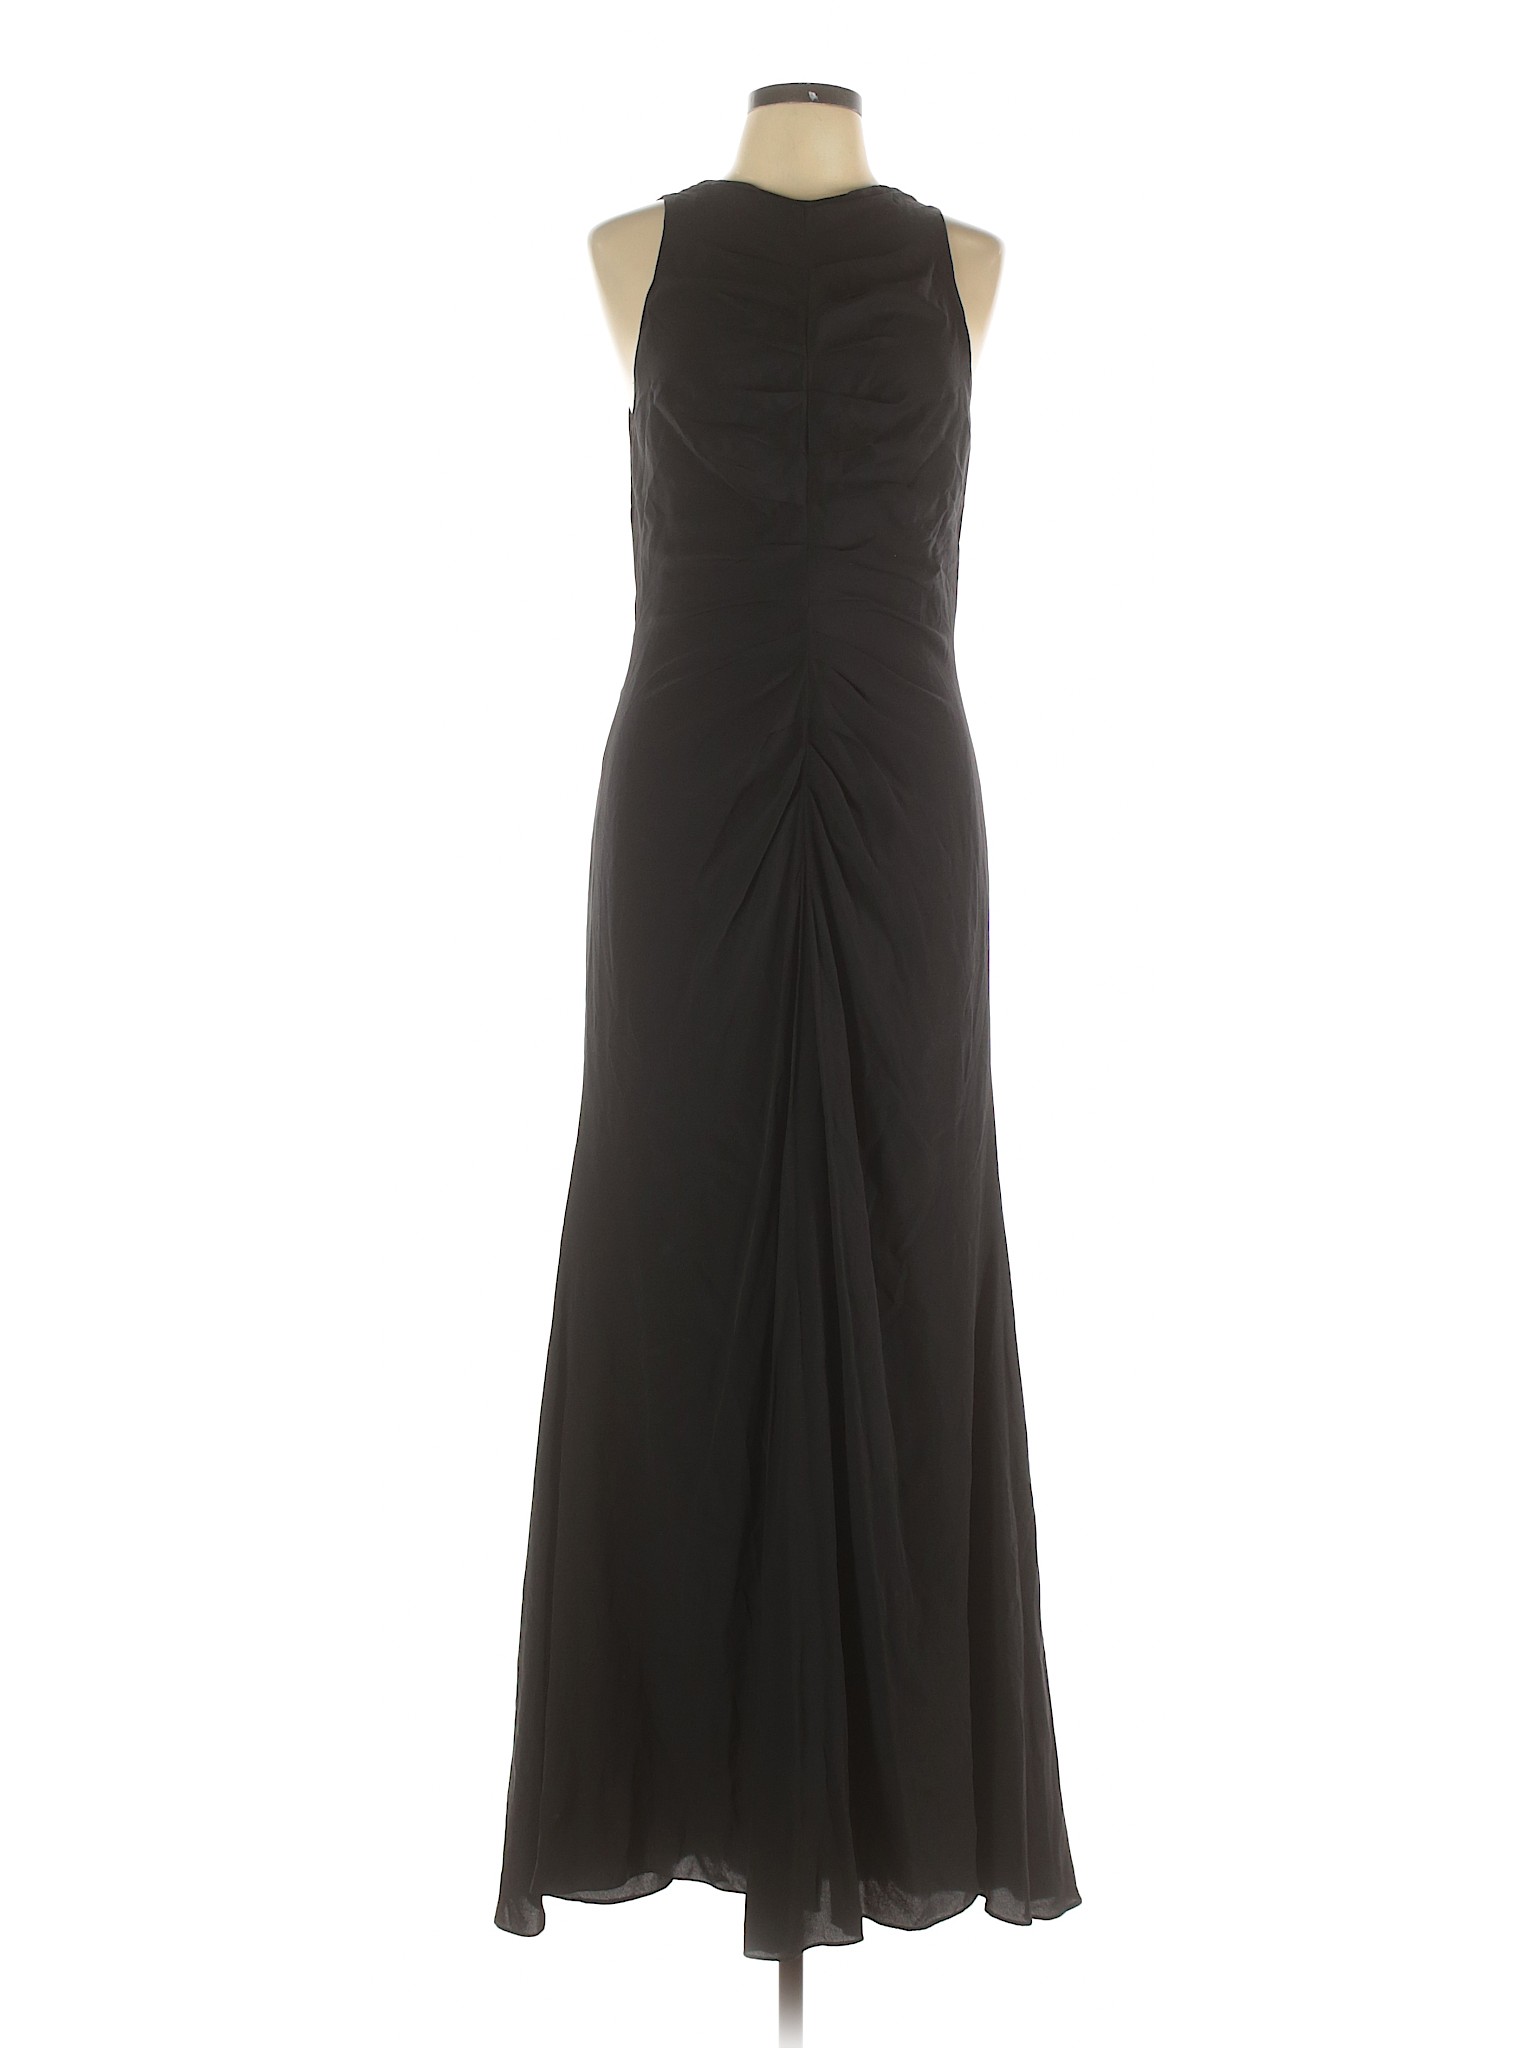 Vera Wang Collection Solid Black Cocktail Dress Size 10 - 68% off | thredUP